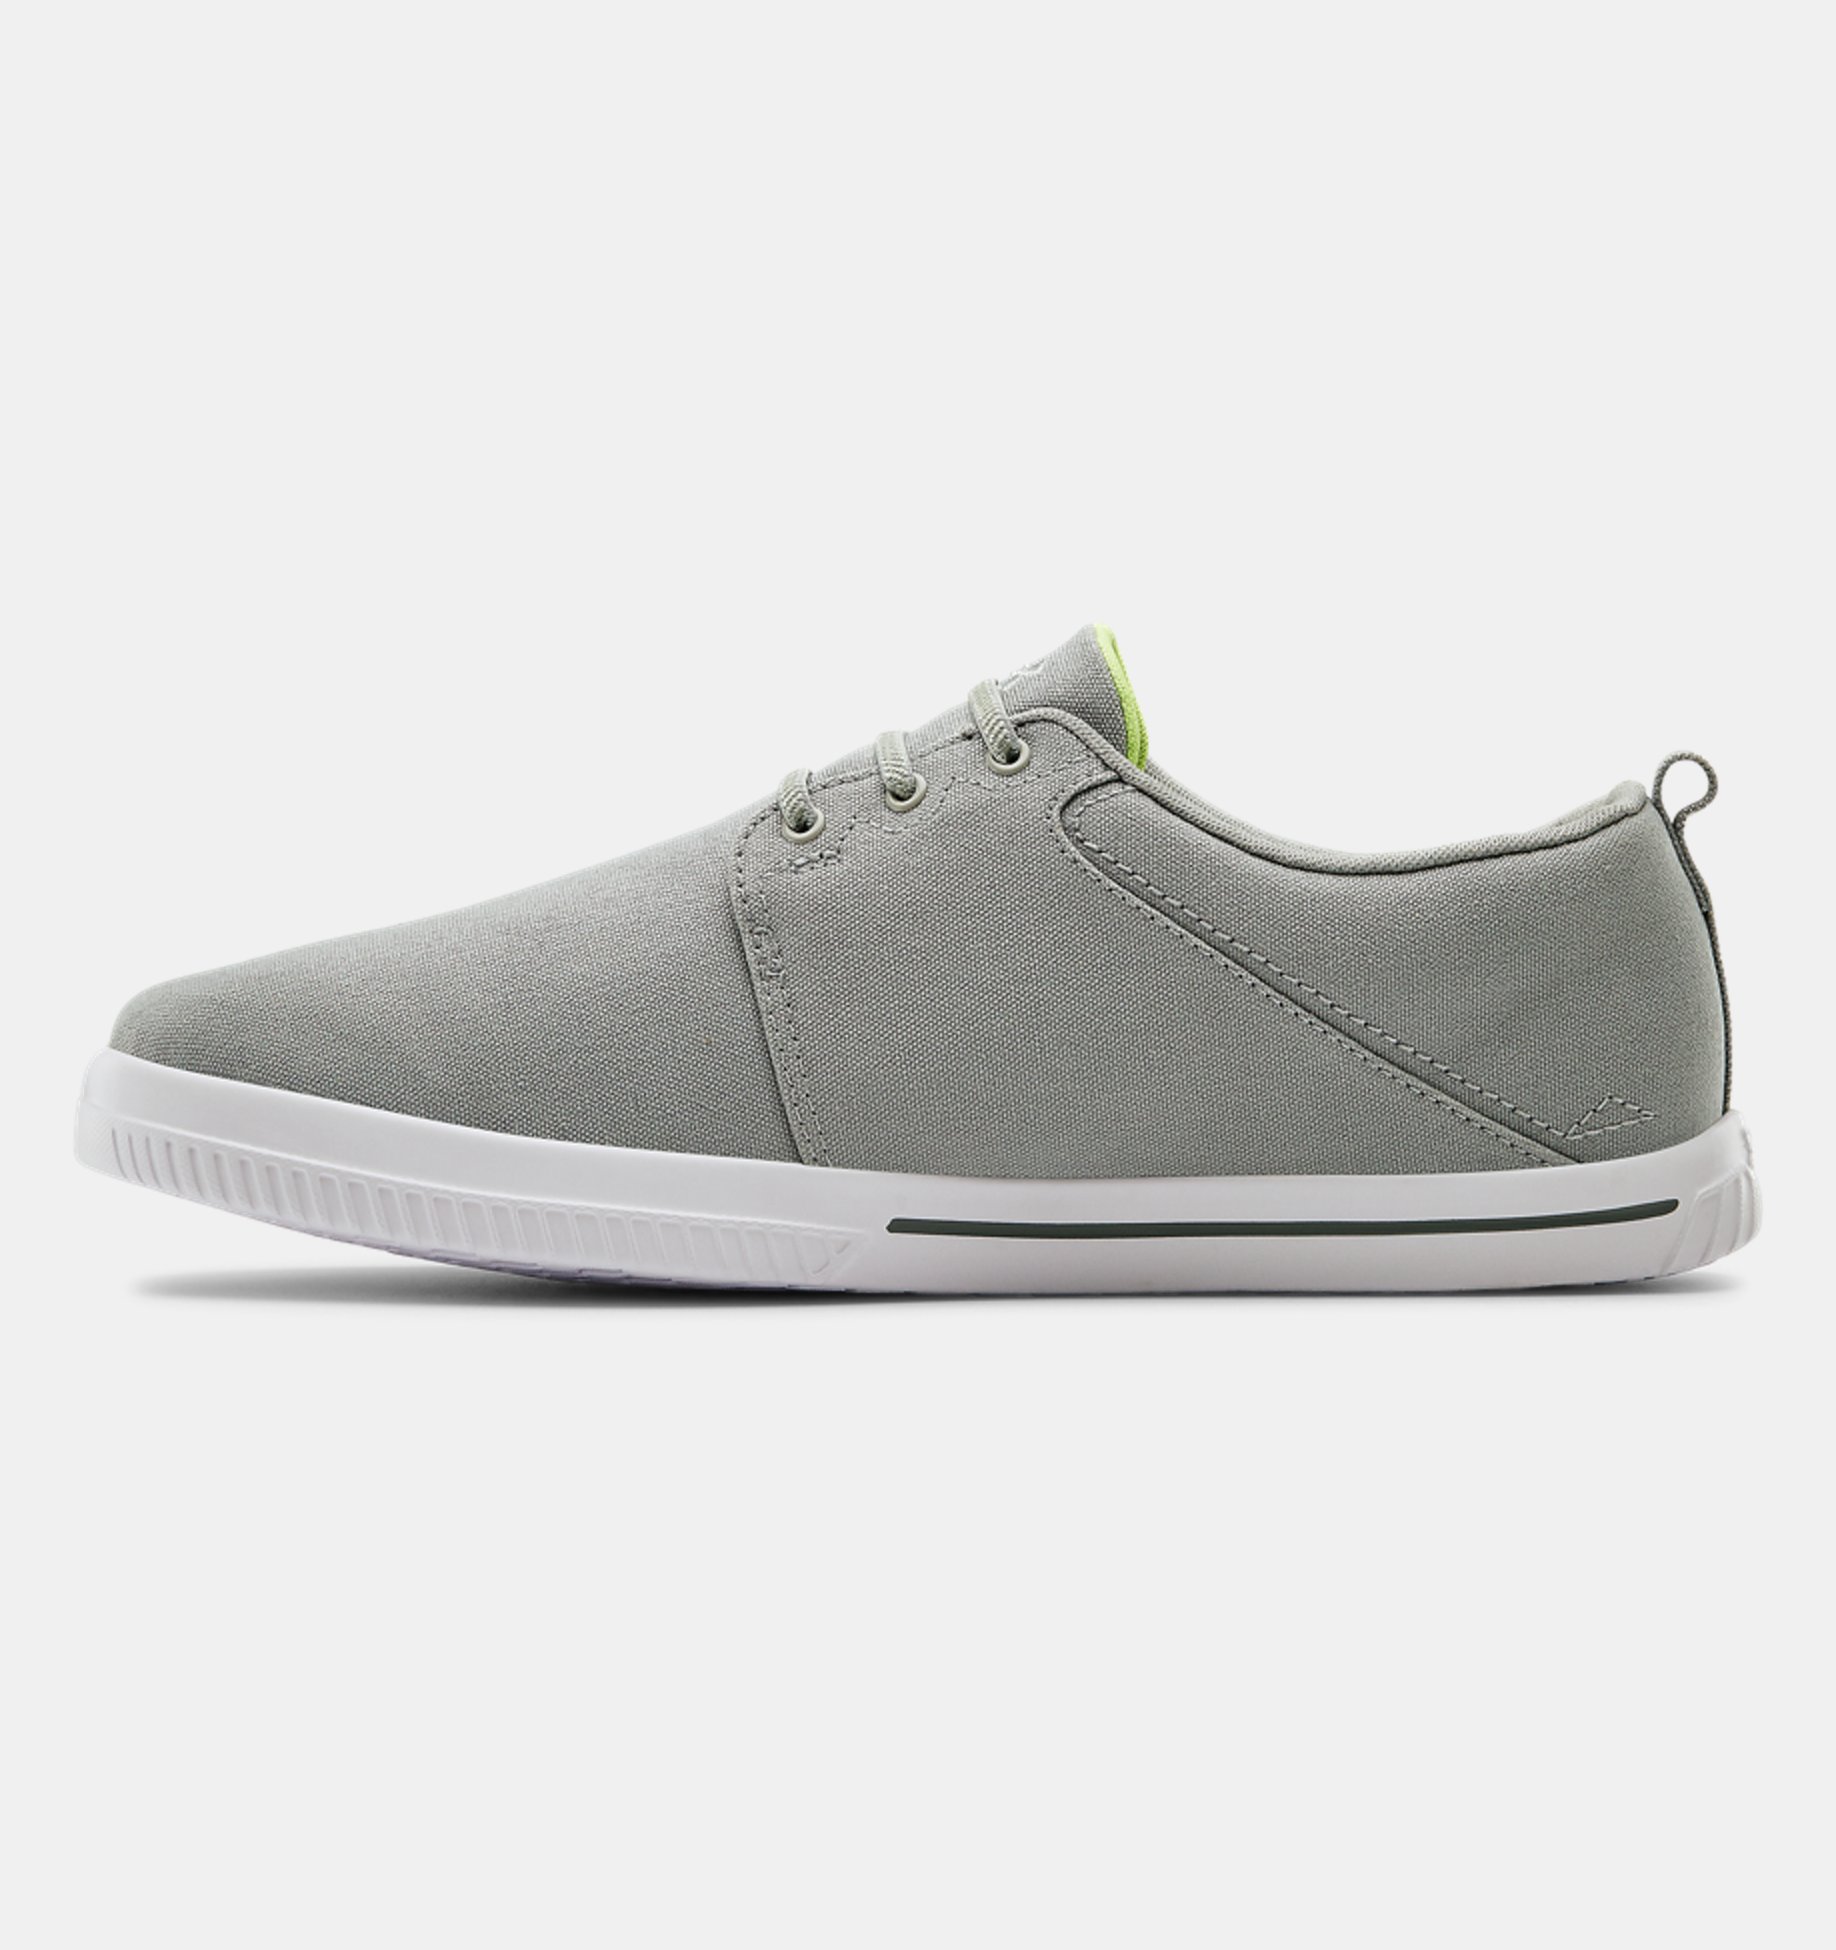 Under Armour Men’s Street Encounter IV traniers **For summer holidays**